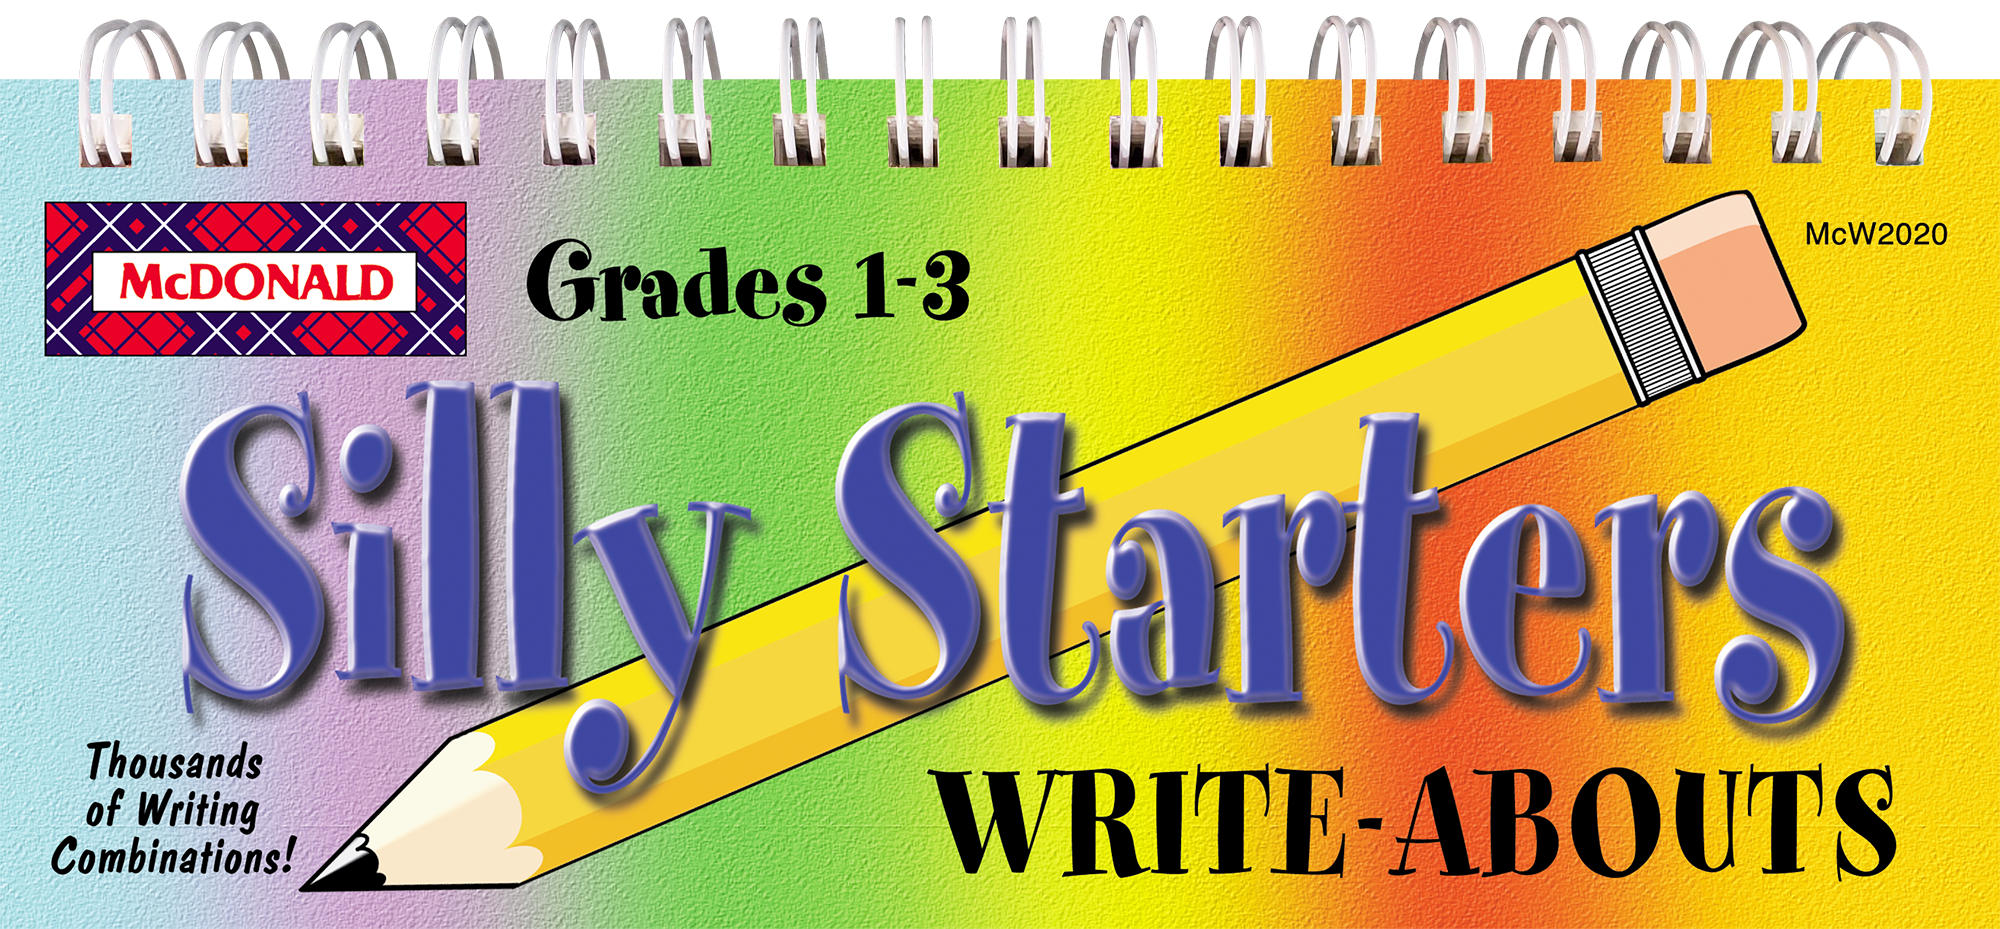 Write-Abouts　Created　Resources　Grades　Teacher　1-3　TCRW2020　Silly　Starters